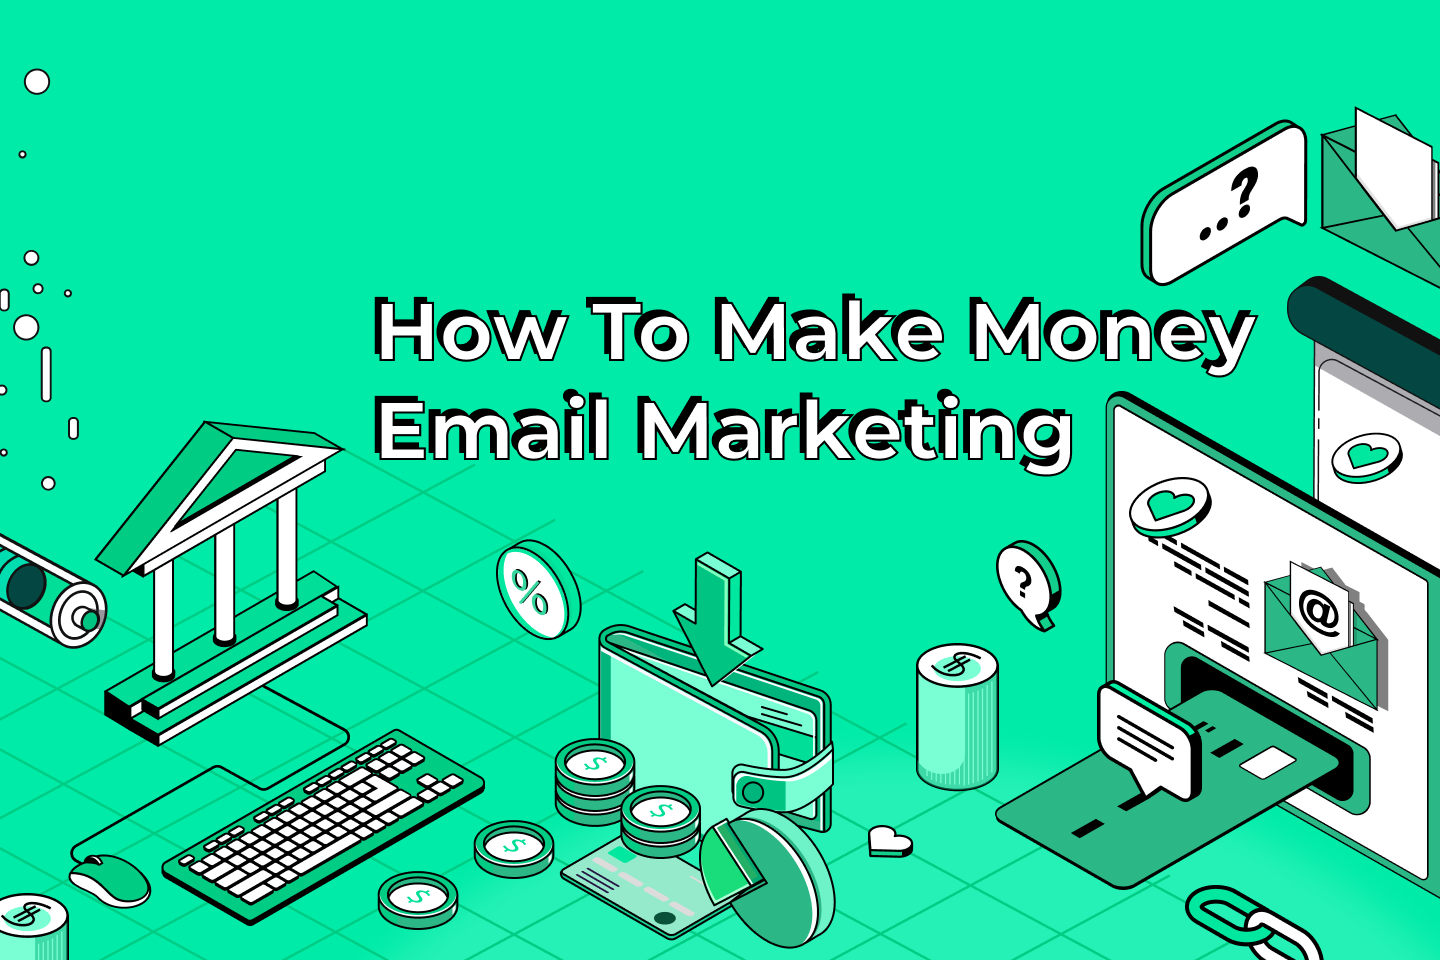 How To Make Money Email Marketing